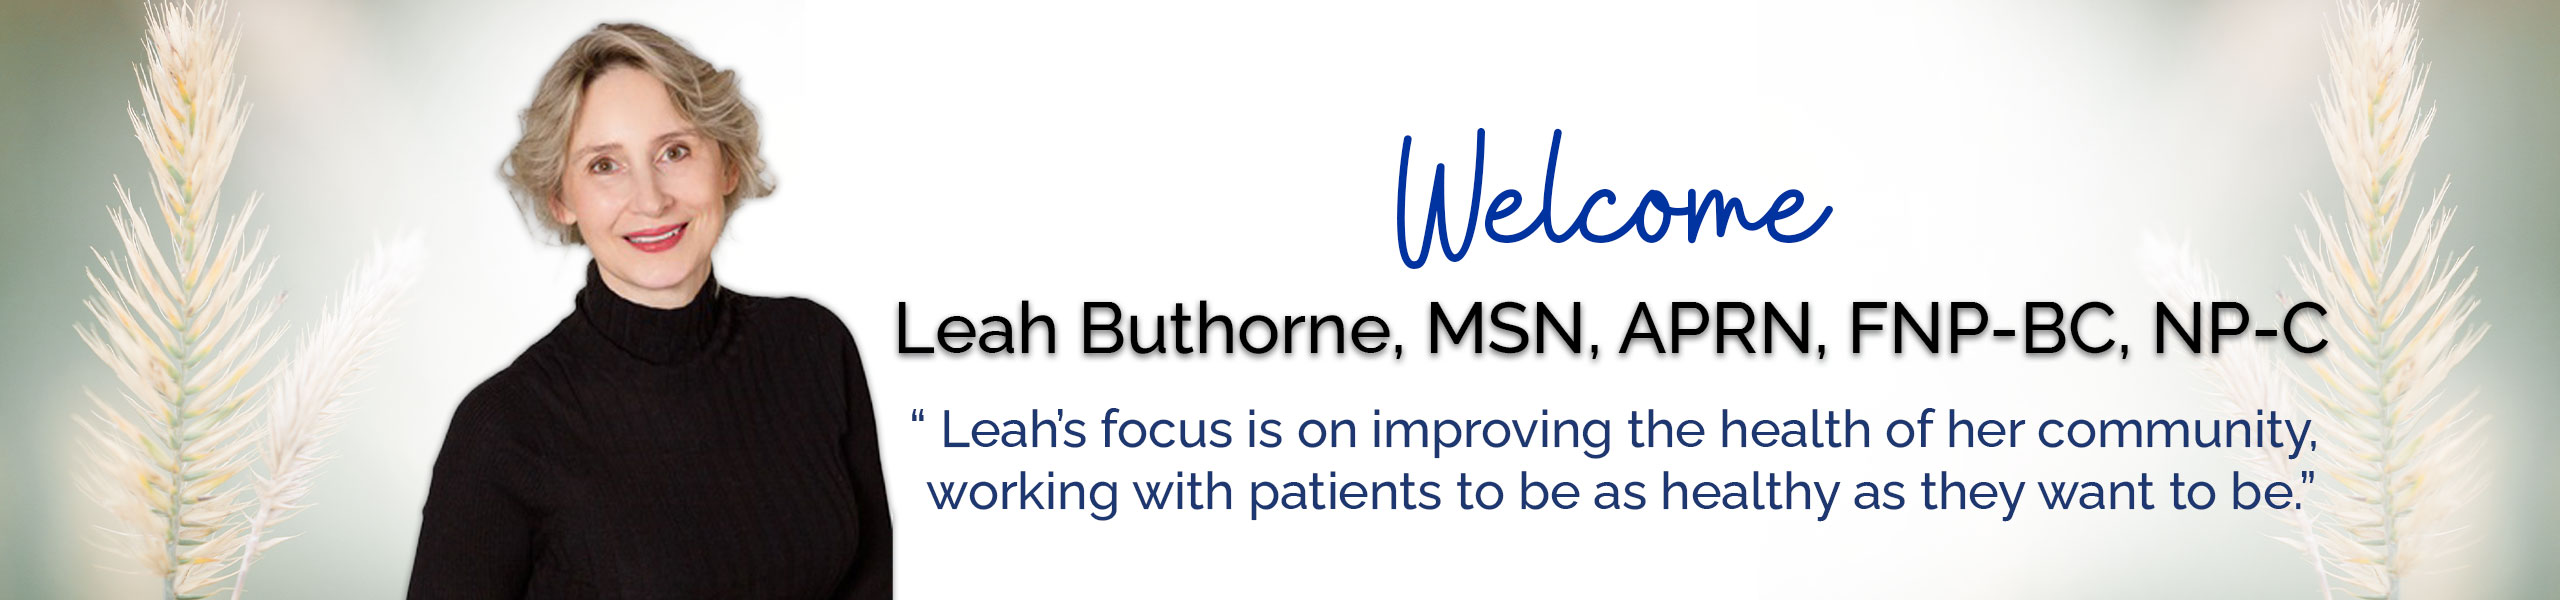 Welcome Leah Buthorne, MSN, APRN, FNP-BC, NP-C

Leah’s focus is on improving the health of her community, working with patients to be as healthy as they want to be.